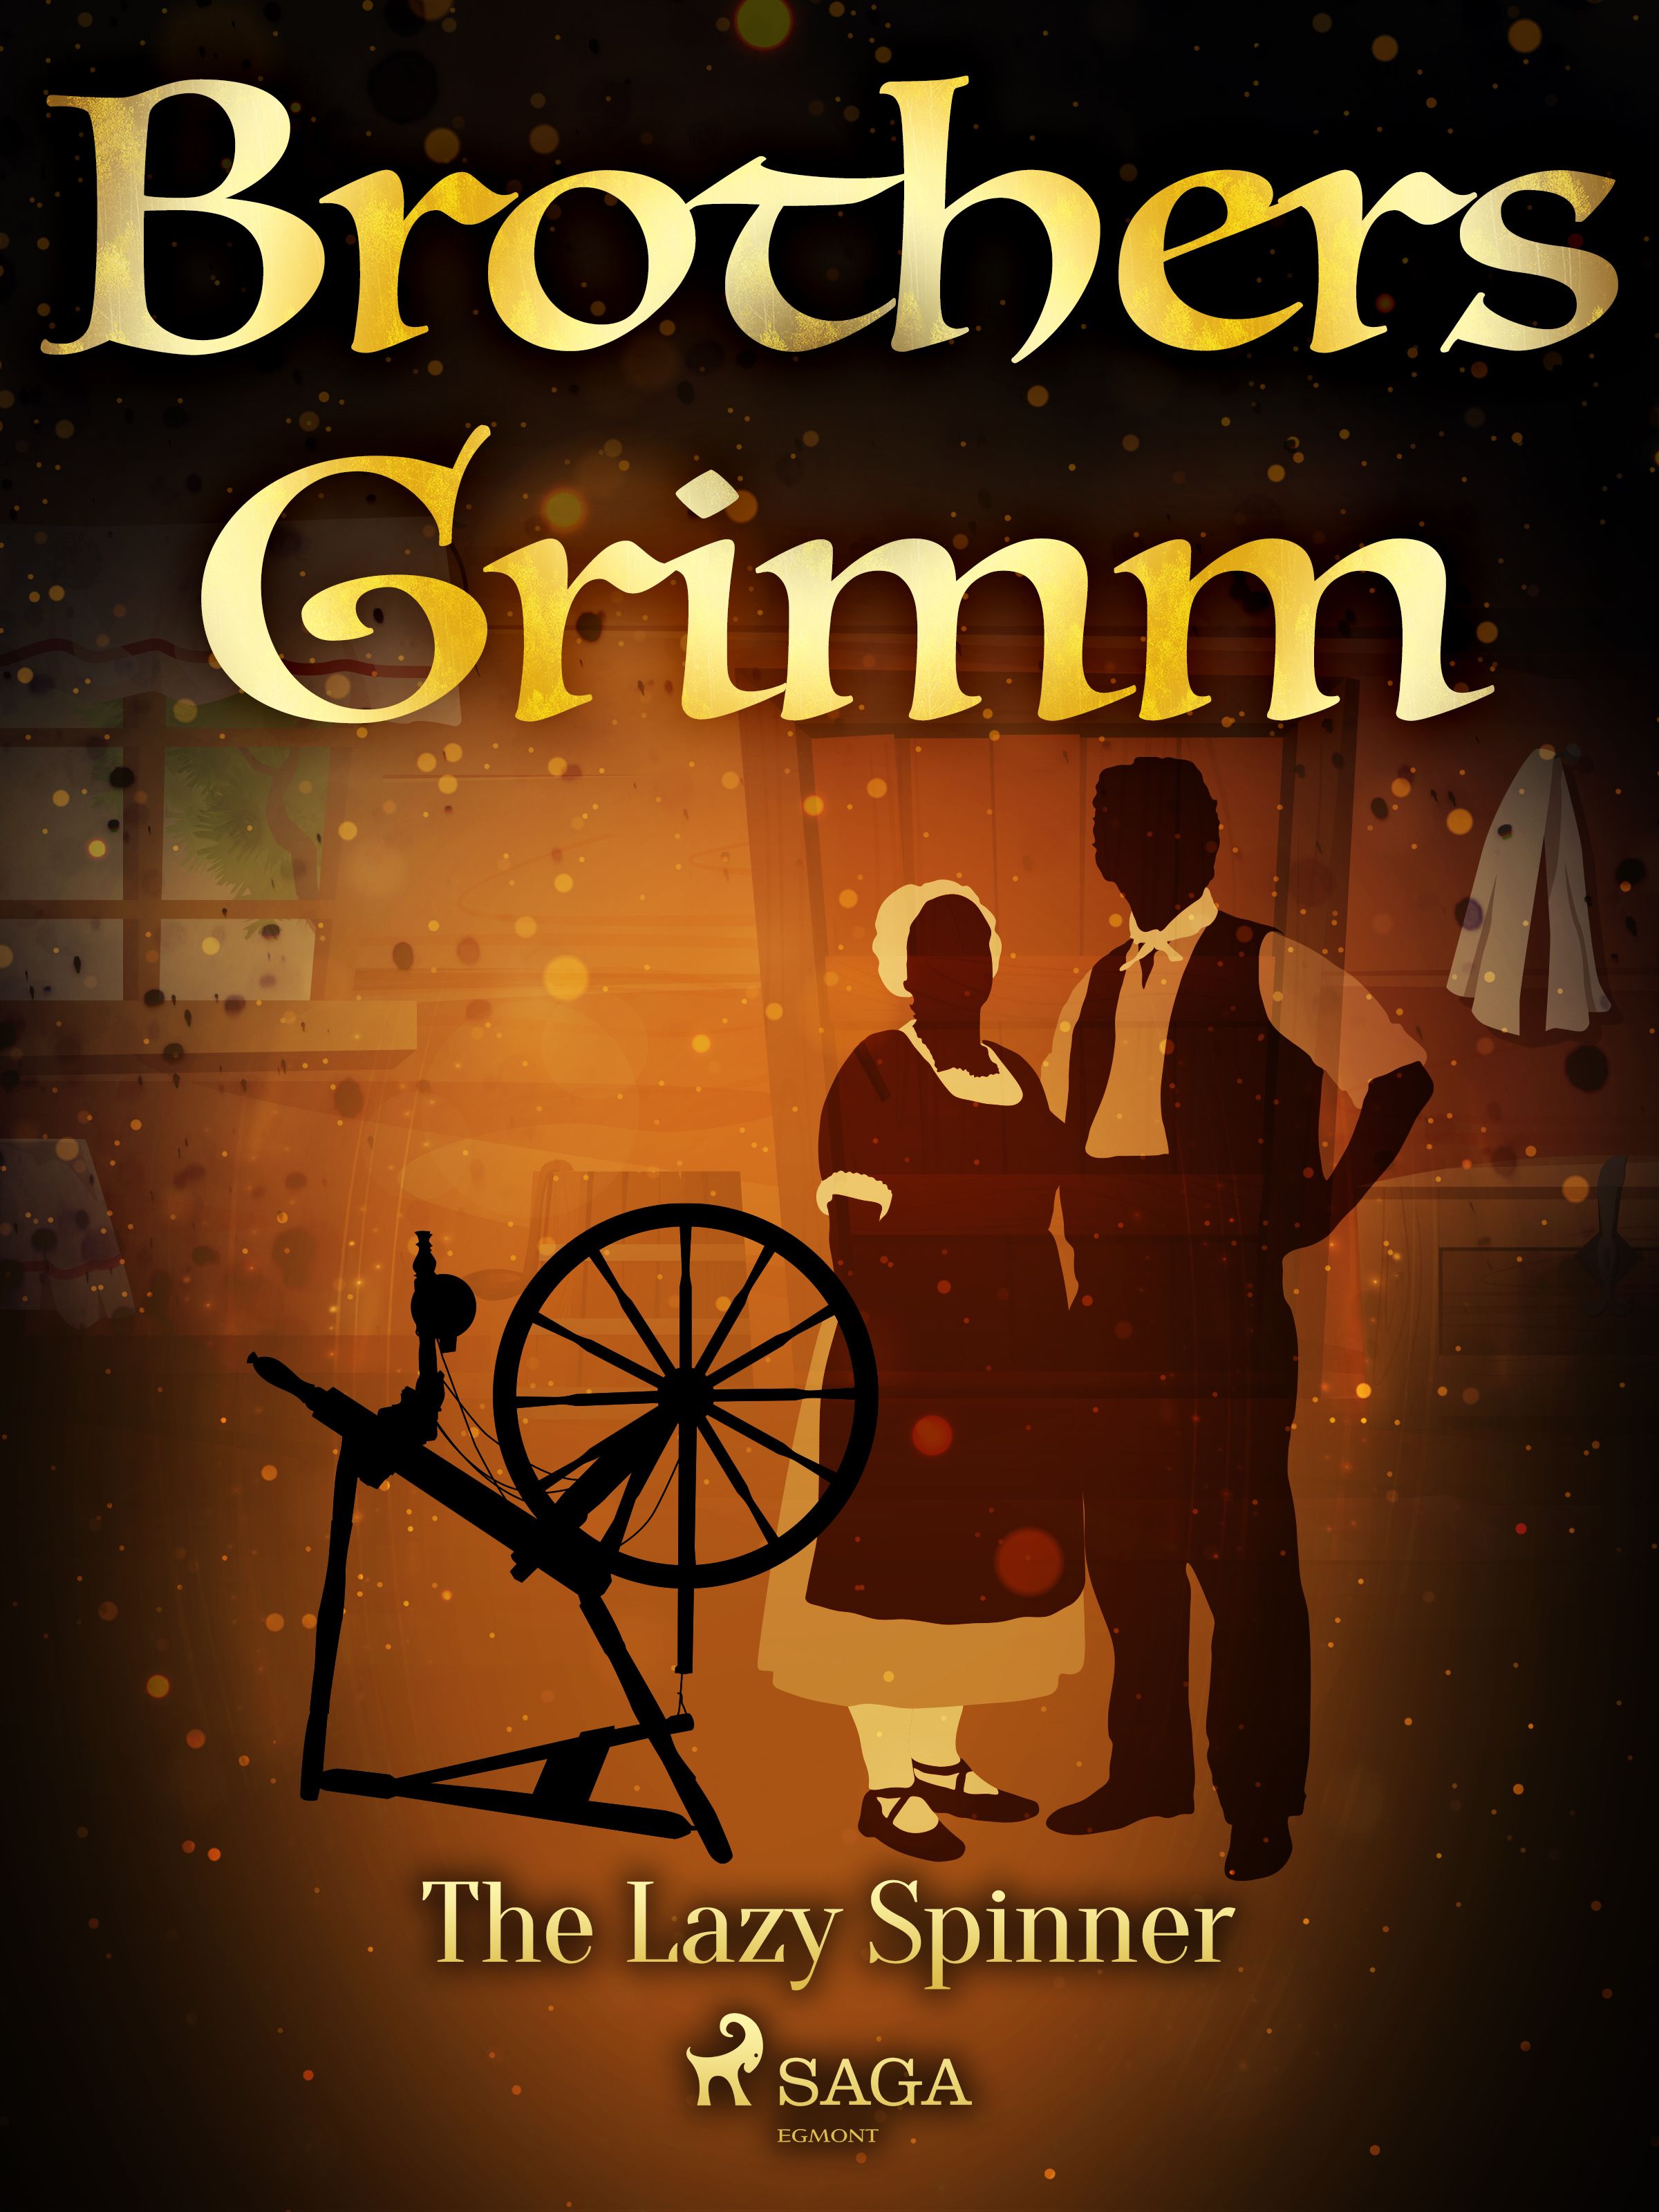 The Lazy Spinner, eBook by Brothers Grimm